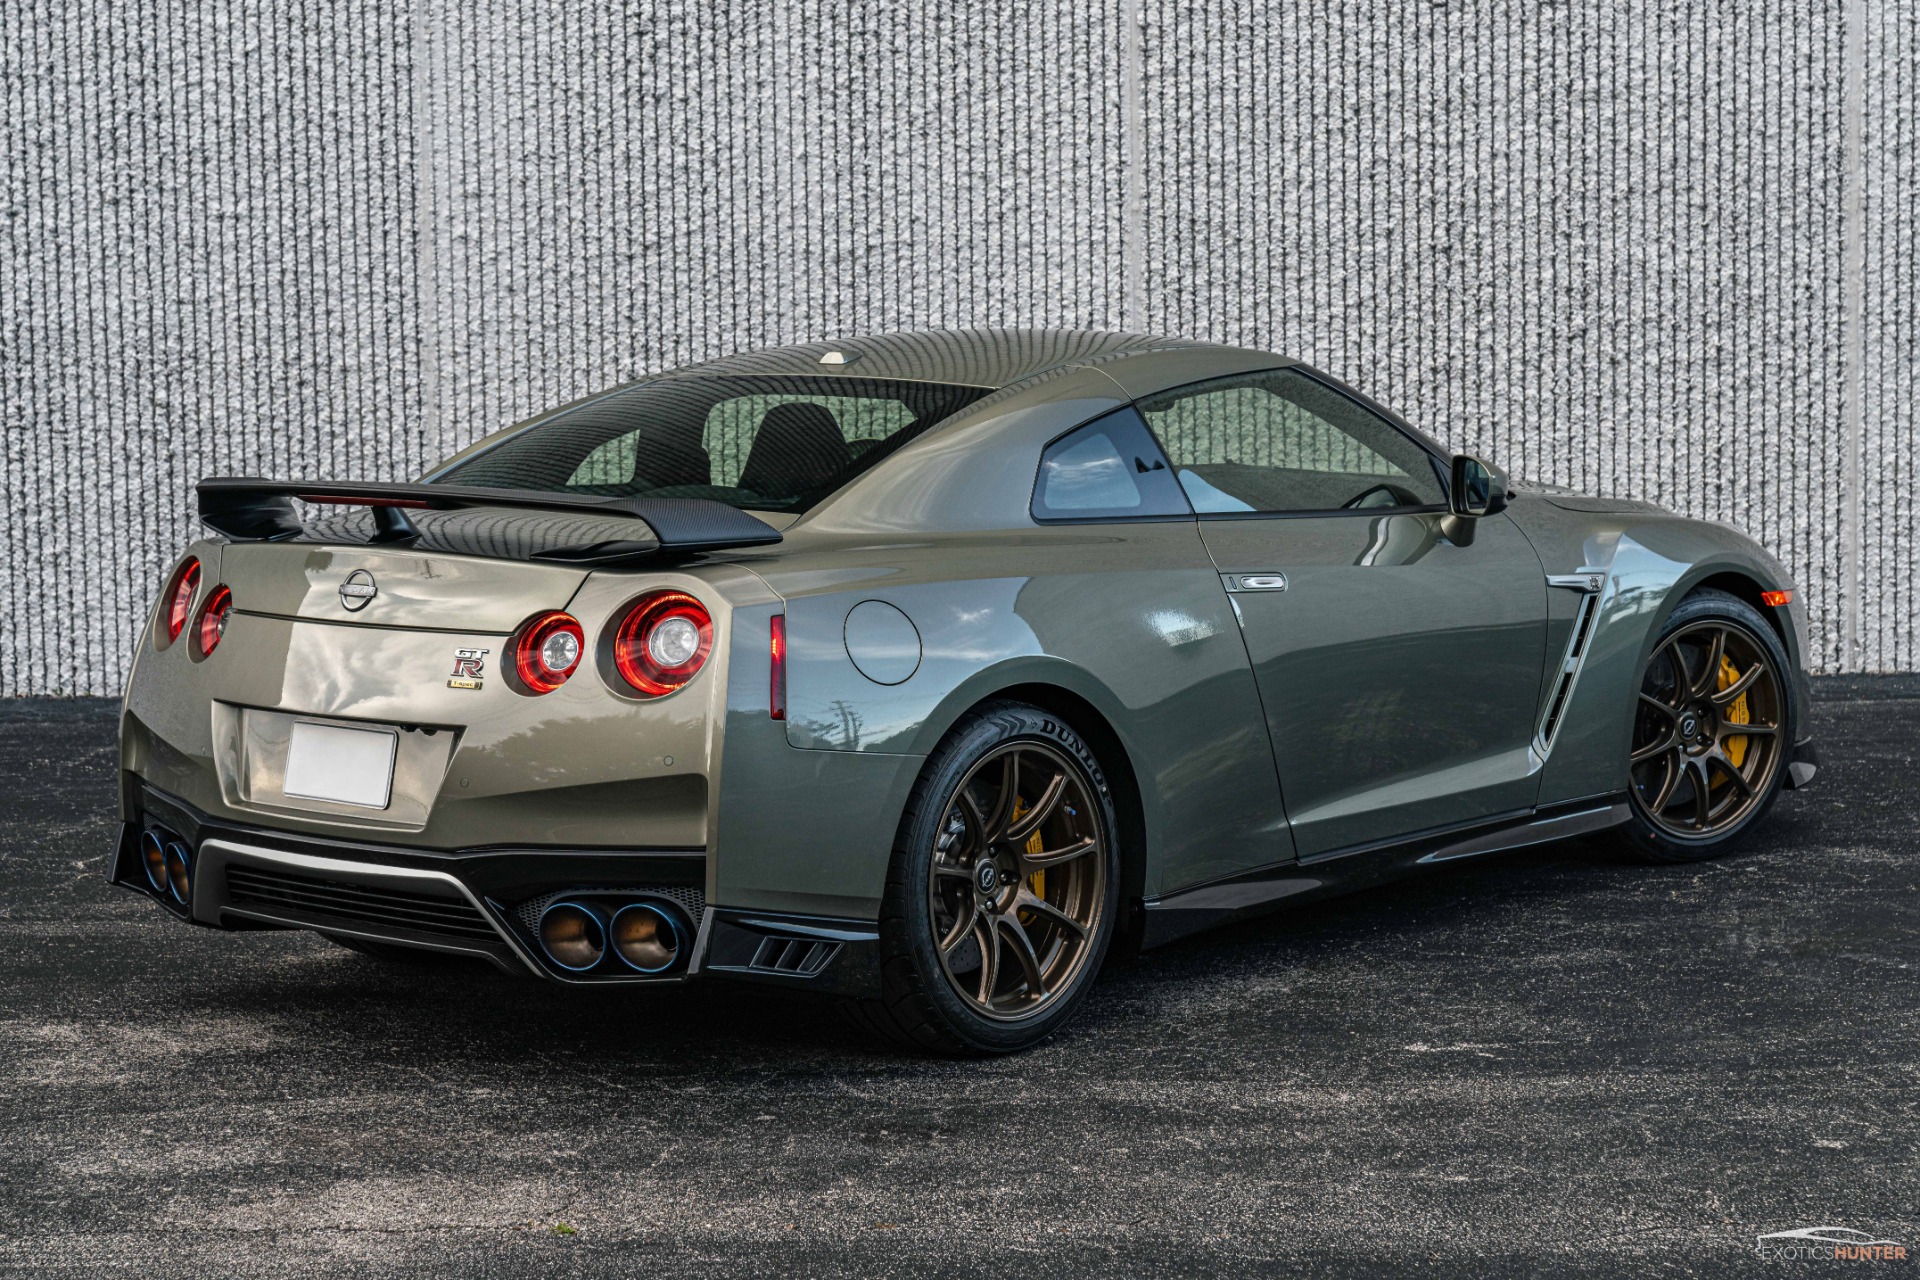 This Nissan Skyline GT-R Sold for Nearly $400,000 Looks Dreamy - The Car  Guide